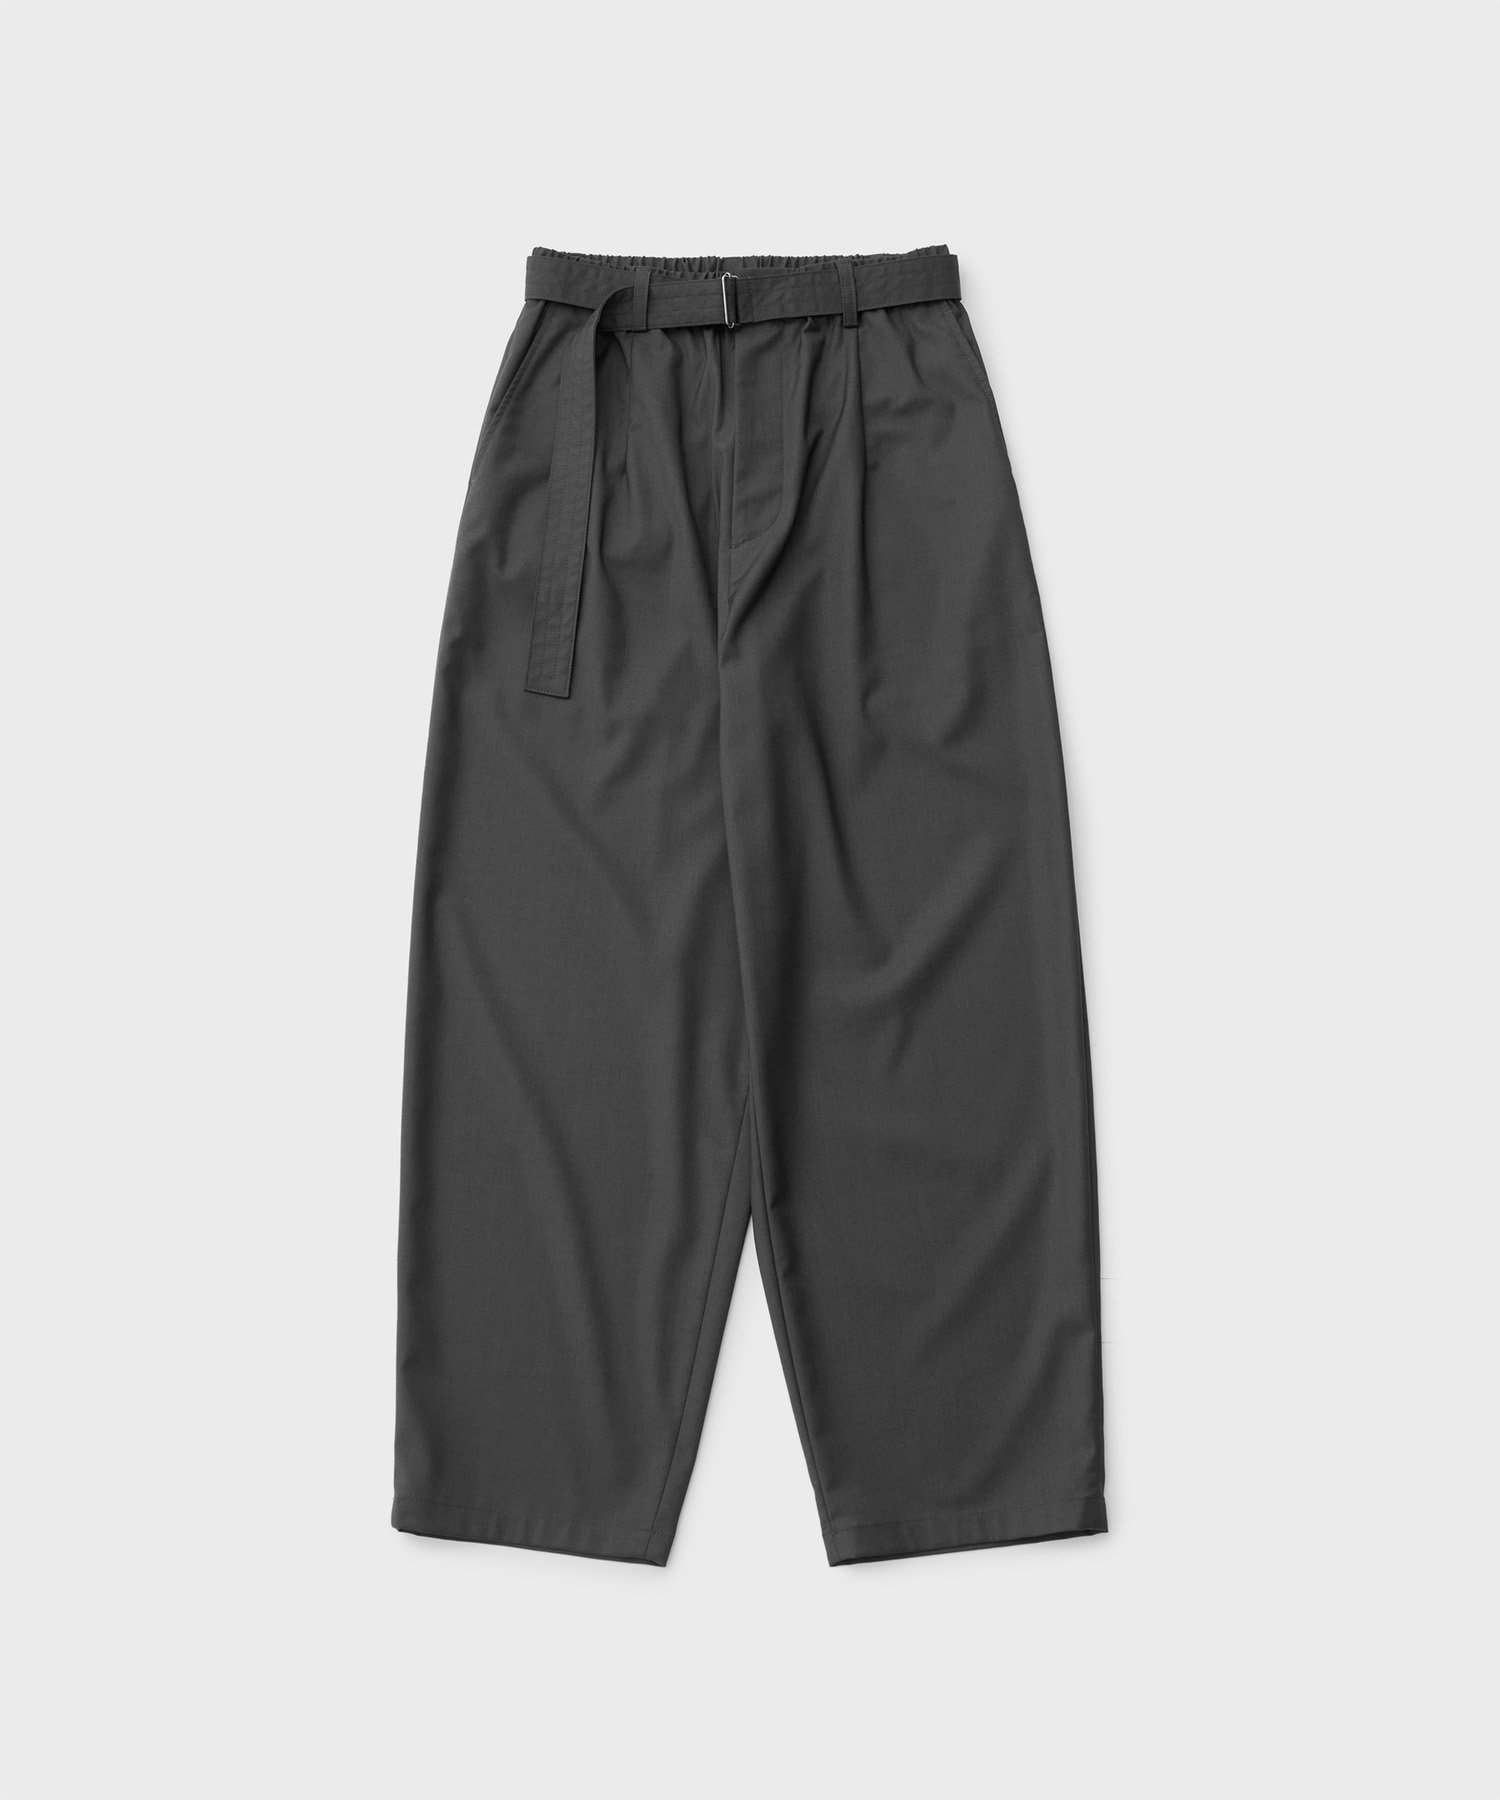 Cocoon Banded Pants (Charcoal)